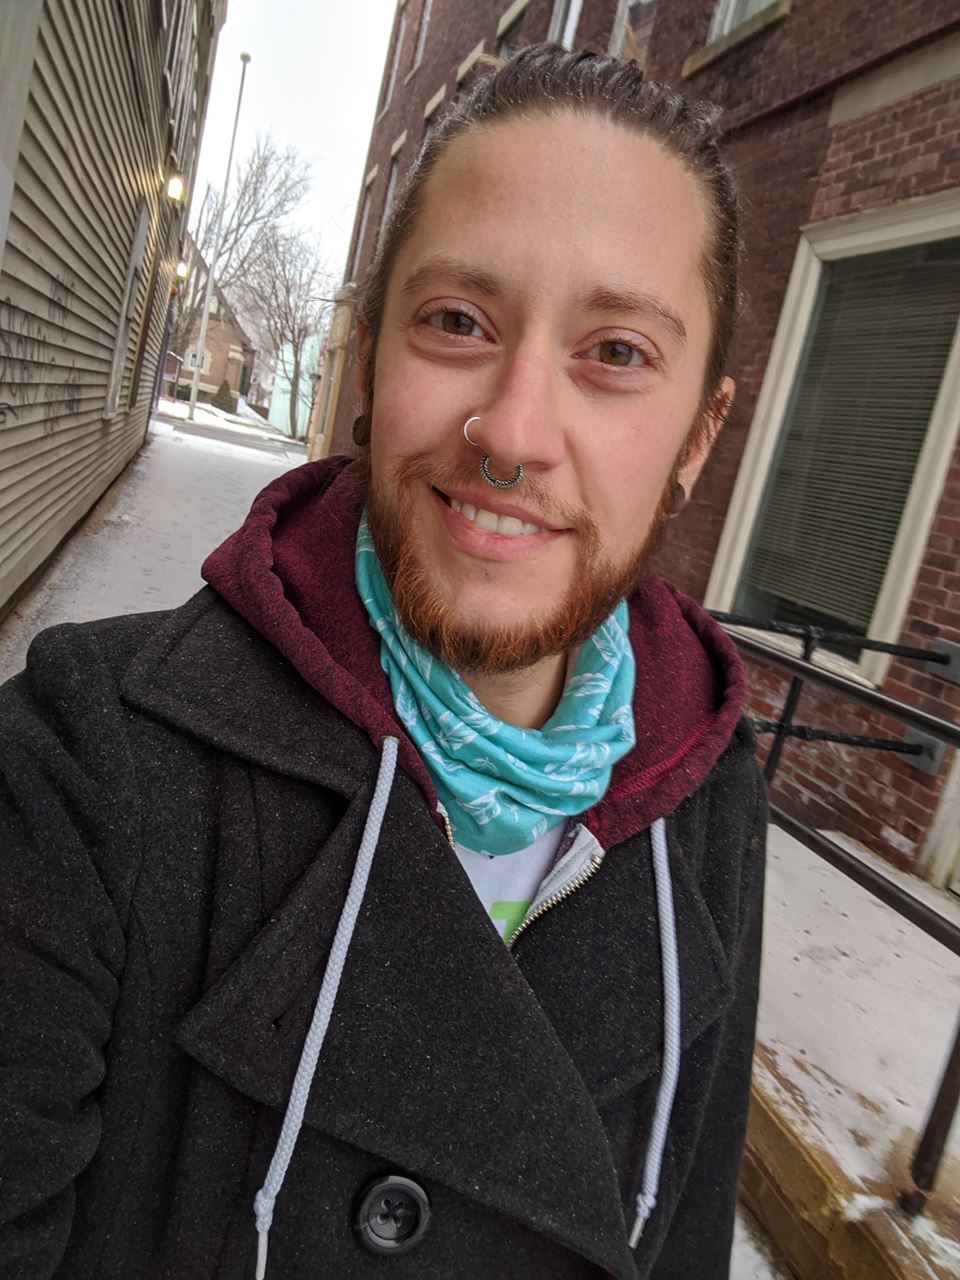 Selfie of Reid. They are white with long brown hair pulled up into a bun. They have a short beard, a nose ring and a septum ring. They are wearing a teal neckerchief, a maroon hoodie, and a grey peacoat. They are standing in an alleyway between two brick buildings and there is snow on the ground behind them.